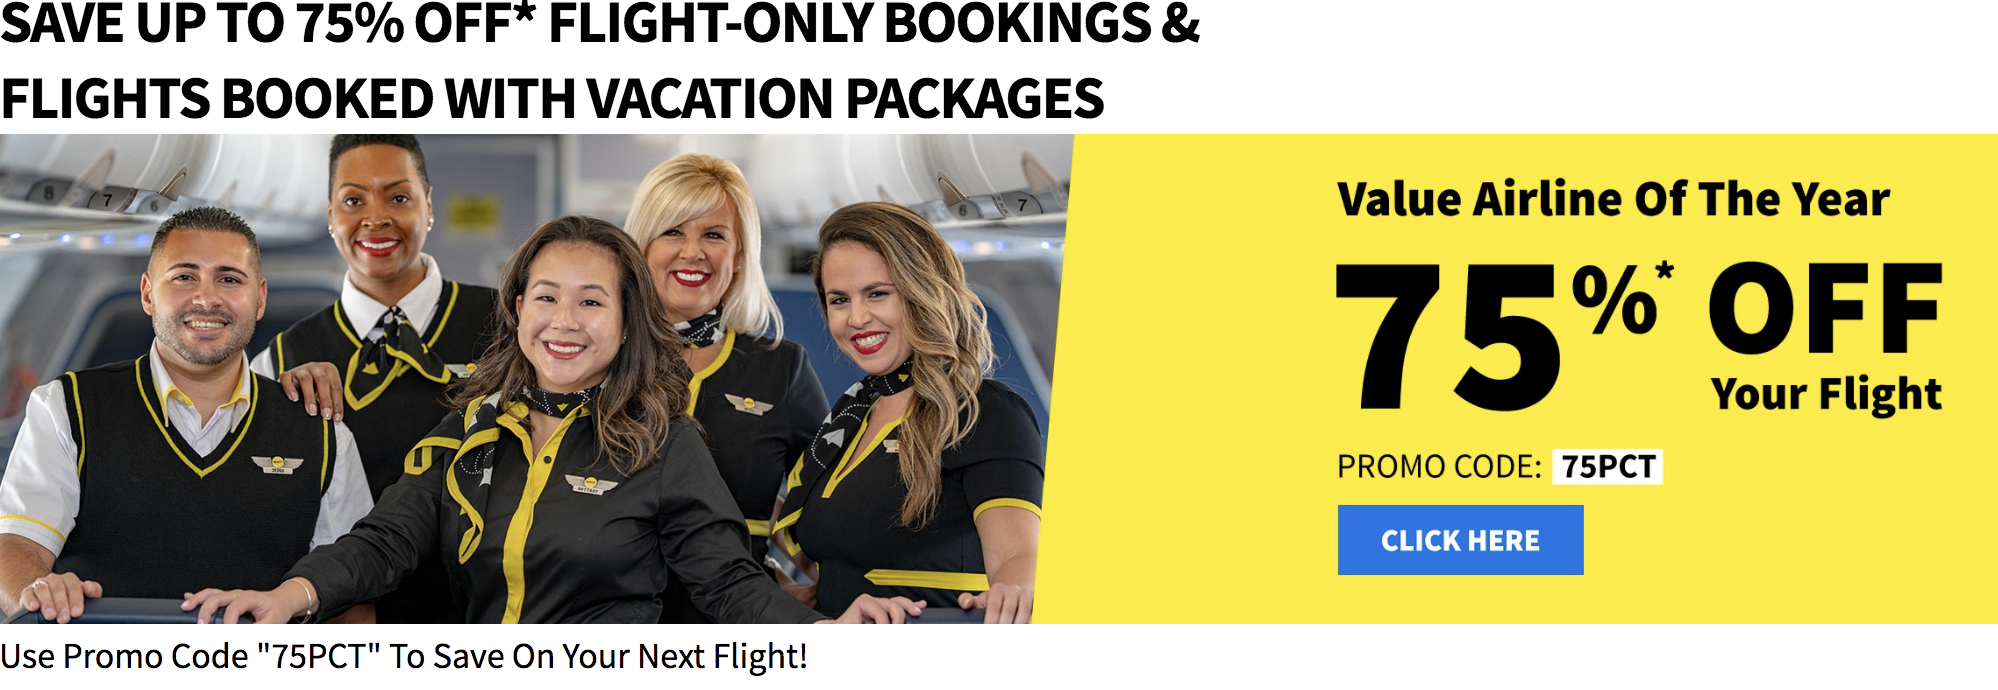 Spirit Airlines Sale with 75 OFF Base Fares. Book By Tonight Miles